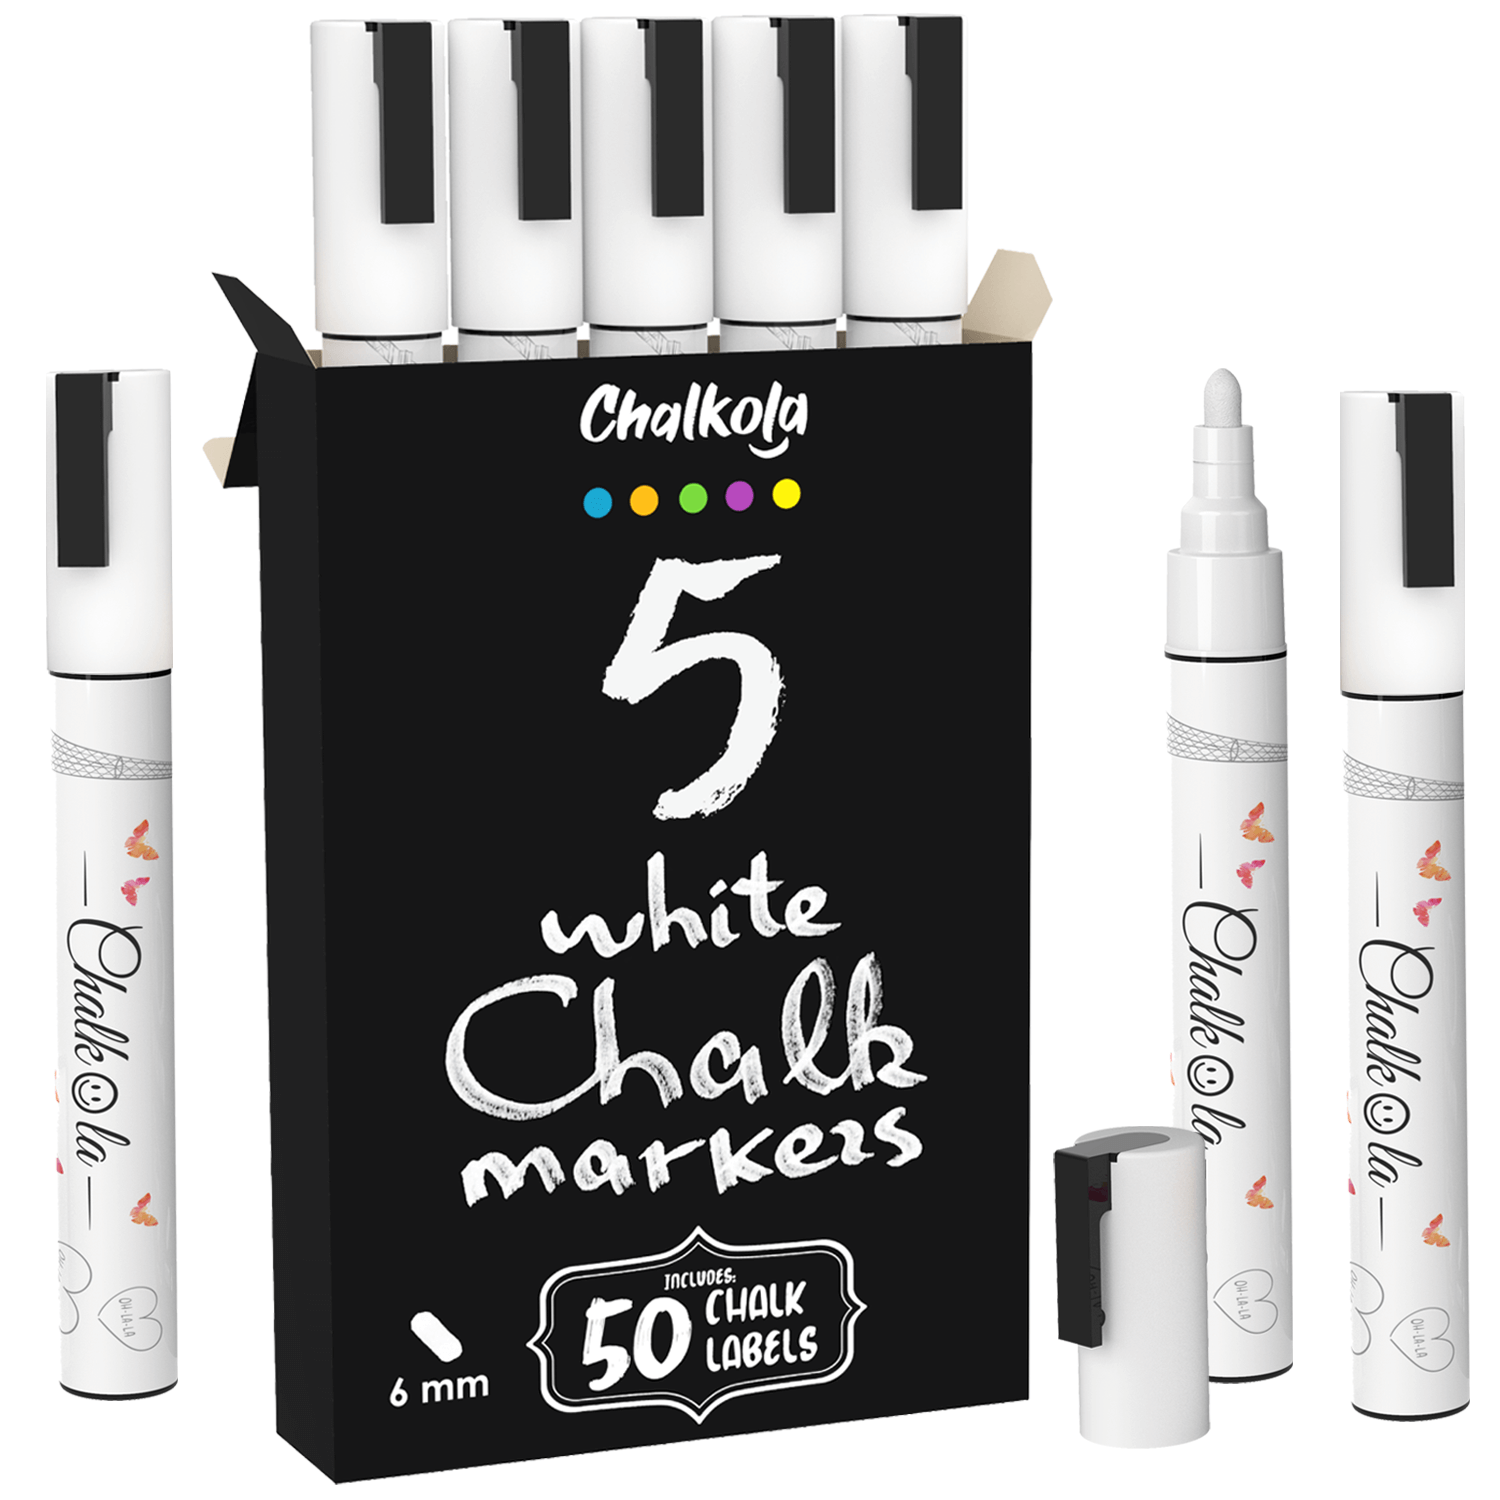  COHEALI 50pcs Marker Refill Marking Pen Refill Nibs Chalk  Markers for Glass Convenient Pen Nibs Pez Refill Fine Tip Paint Pens  Replacements Pen Nibs White Accessories Fiber Student Round 